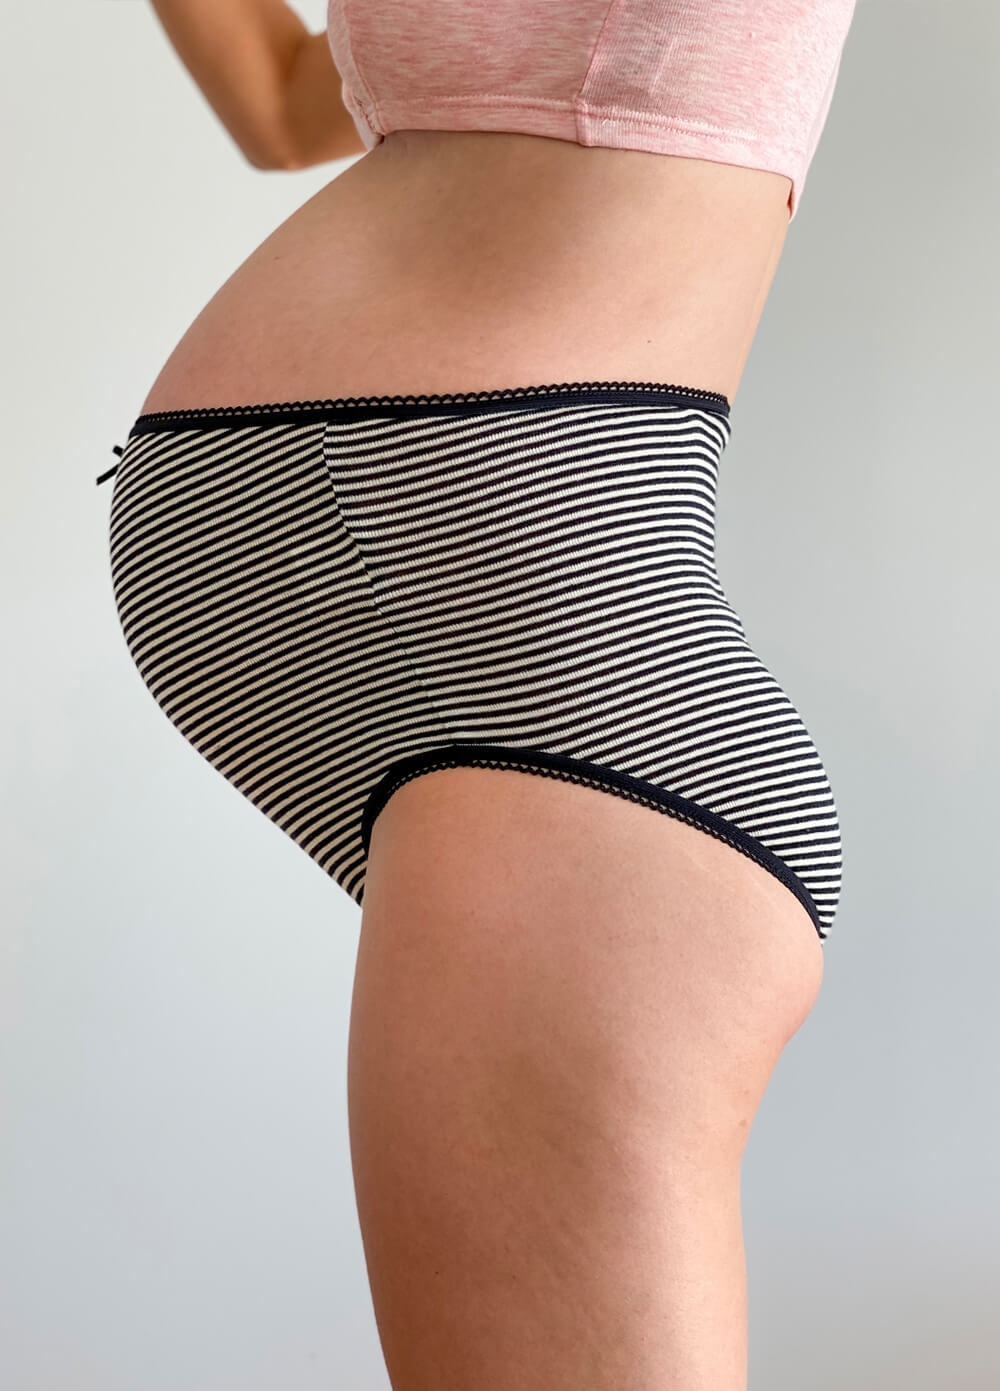 Queen Bee - Evelina 3-pack Maternity Briefs in Black Stripes